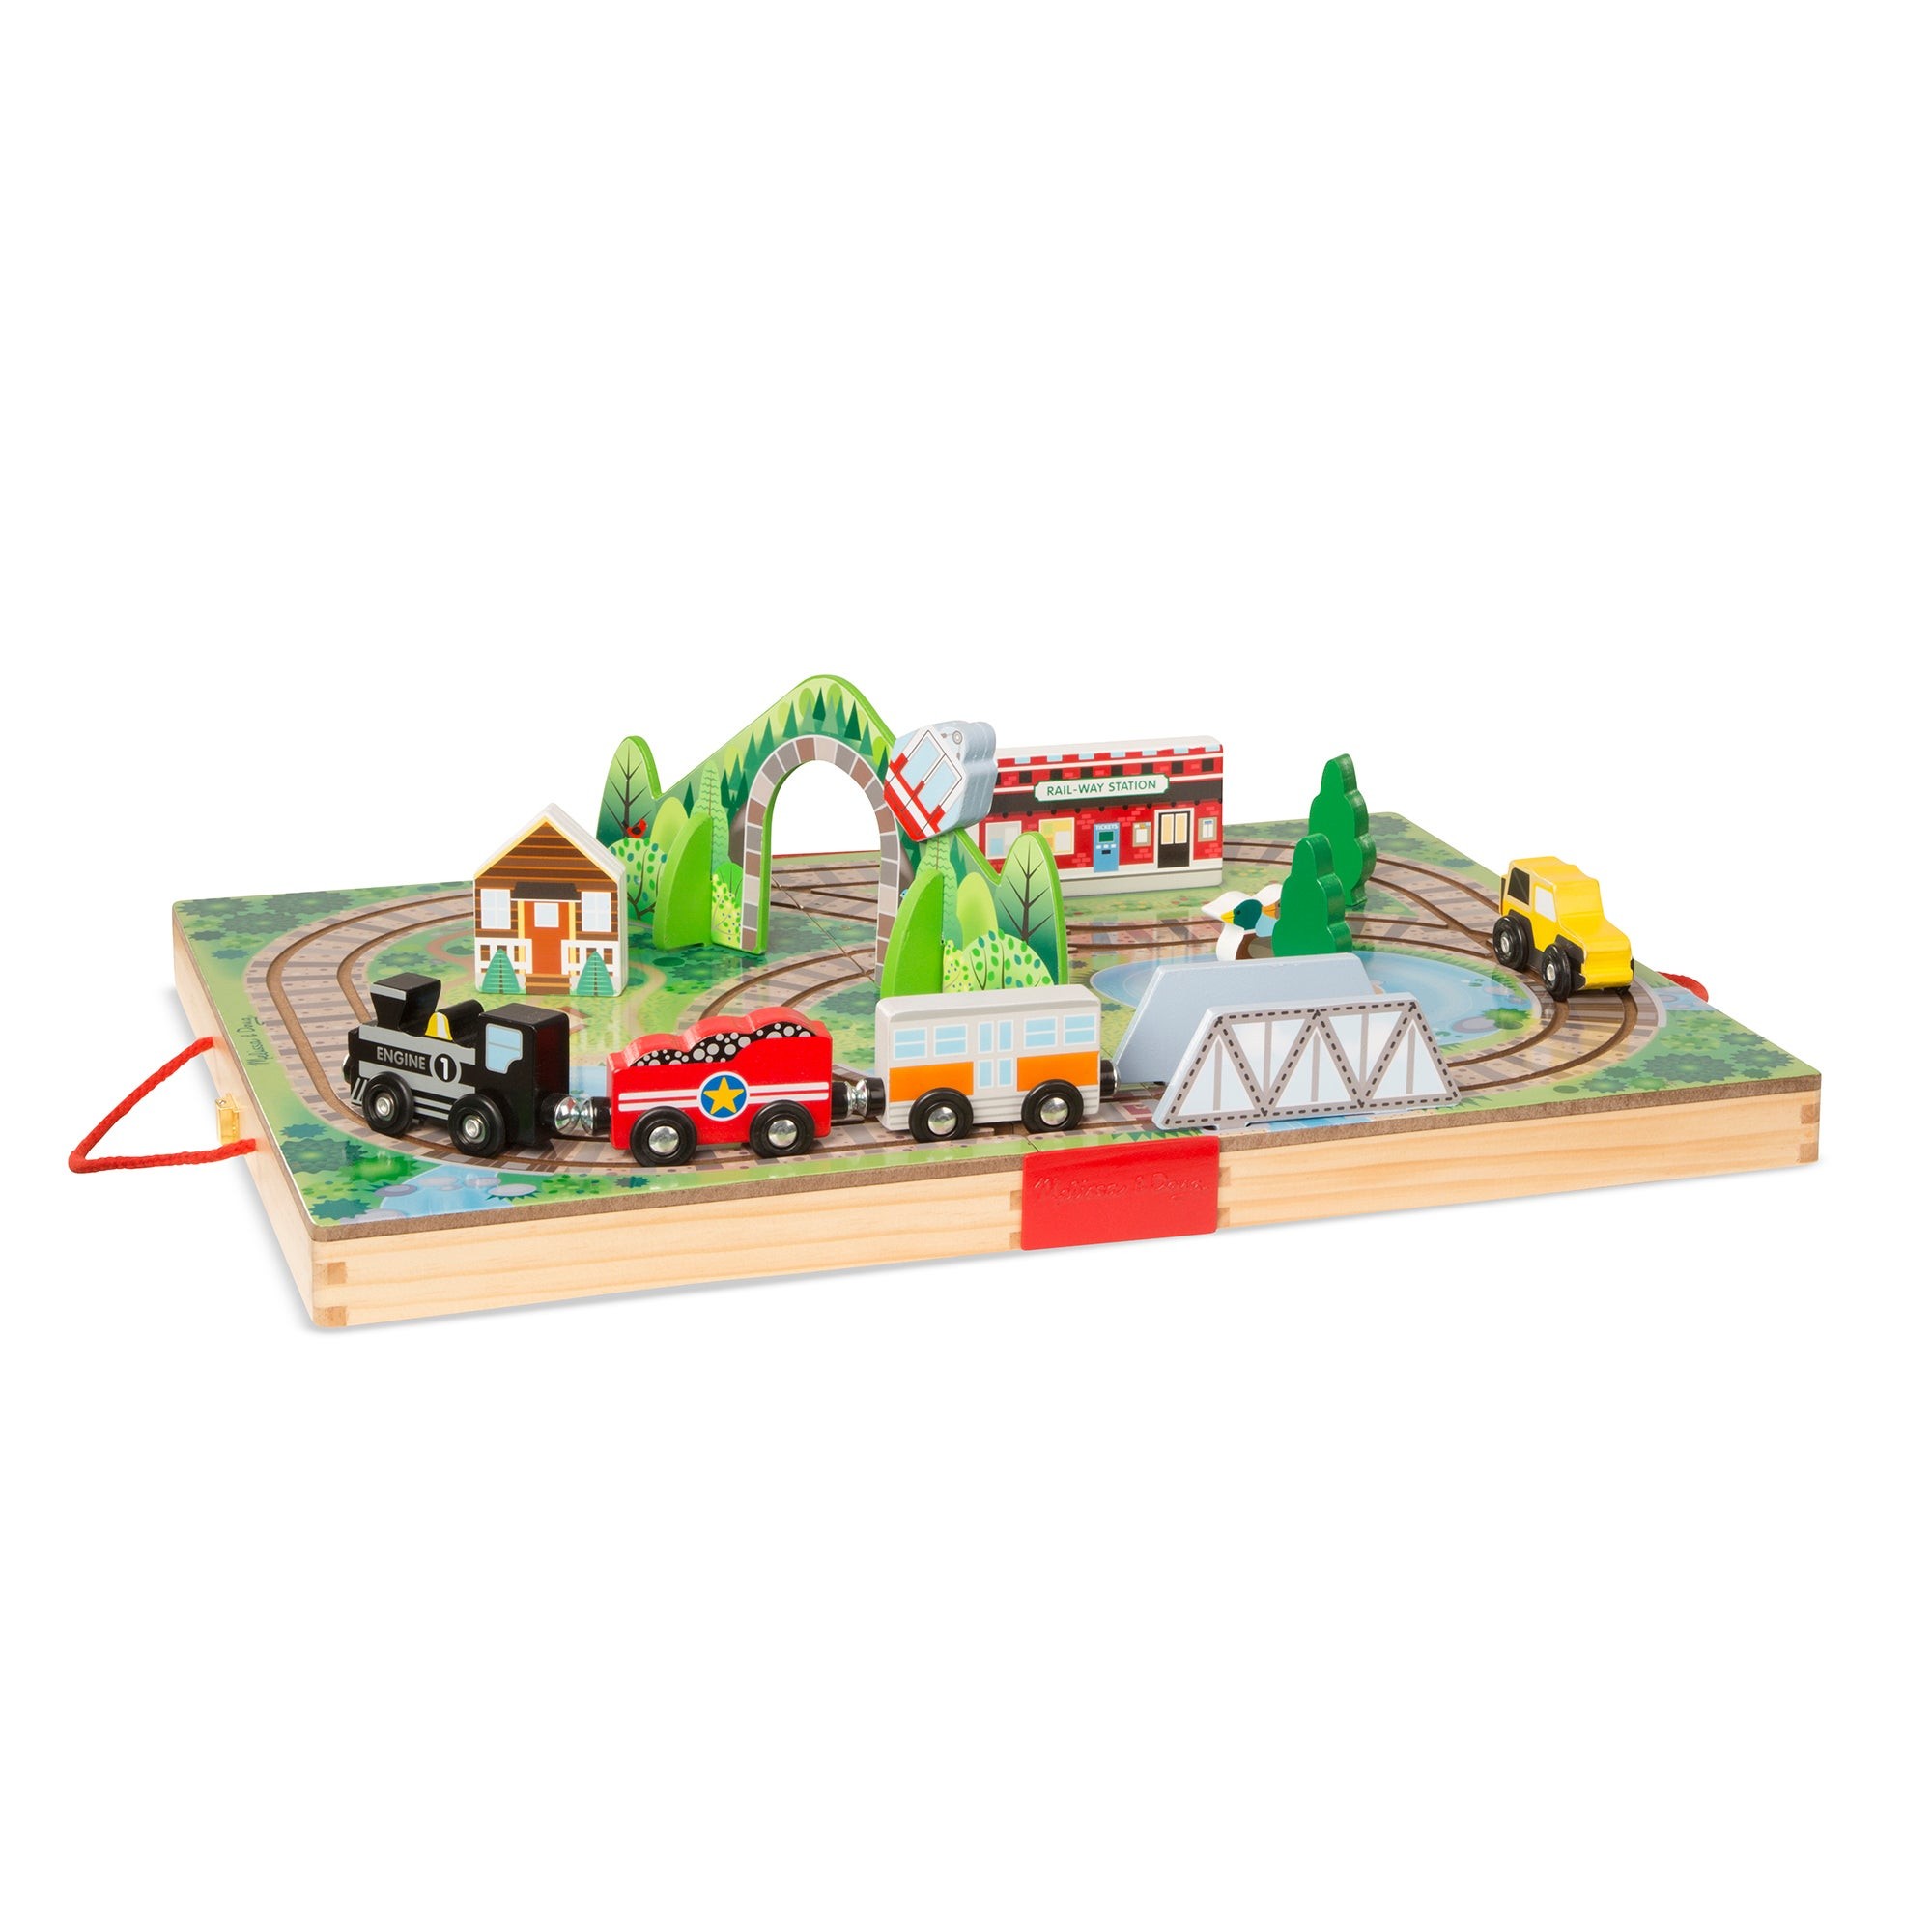 Take-Along Railroad Wooden Toy Set Ages 3+ Years